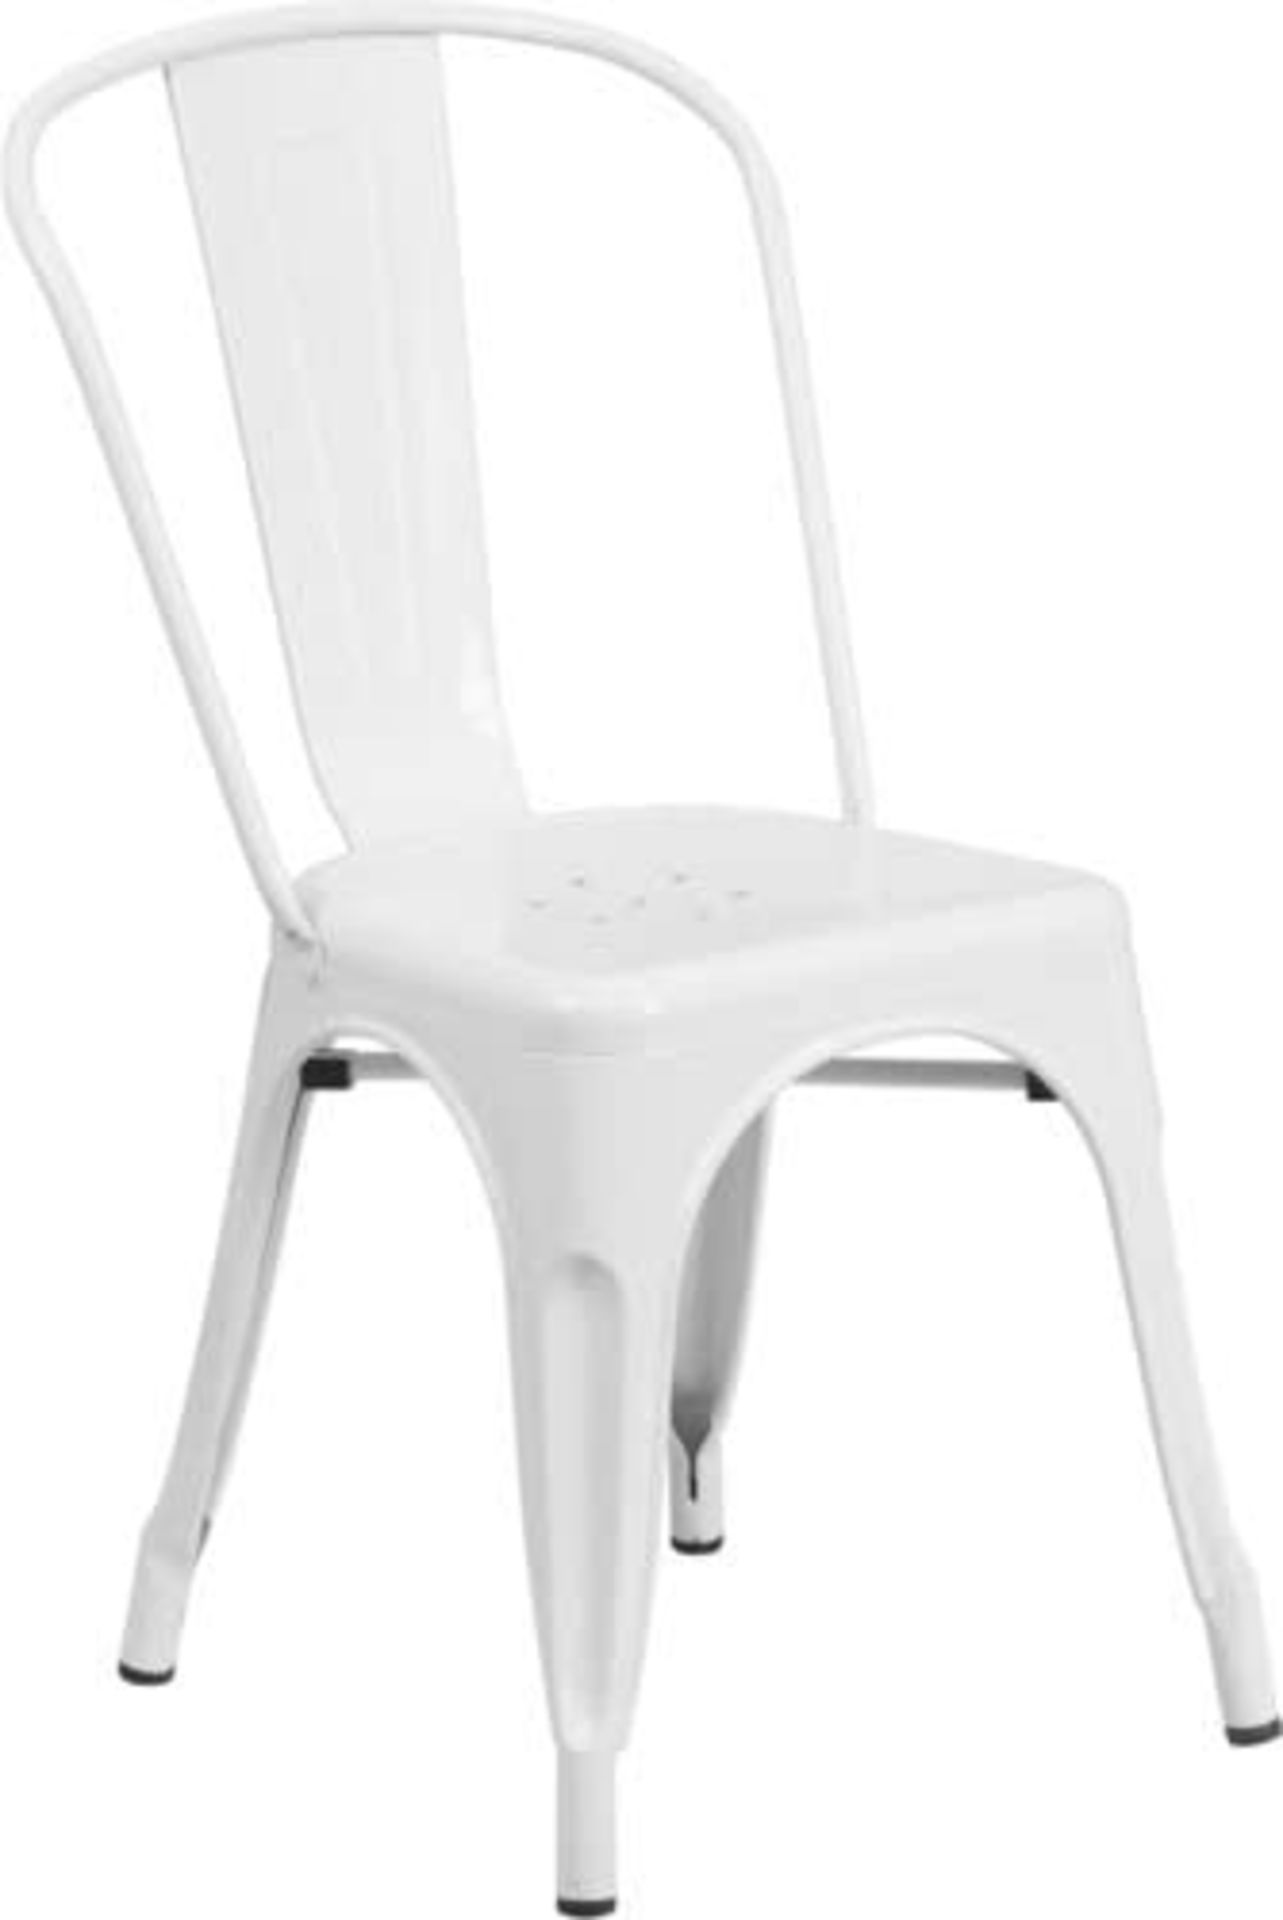 1 x Tolix Industrial Style Outdoor Bistro Table and Chair Set in White- Includes 1 x Table and 4 x - Image 13 of 14